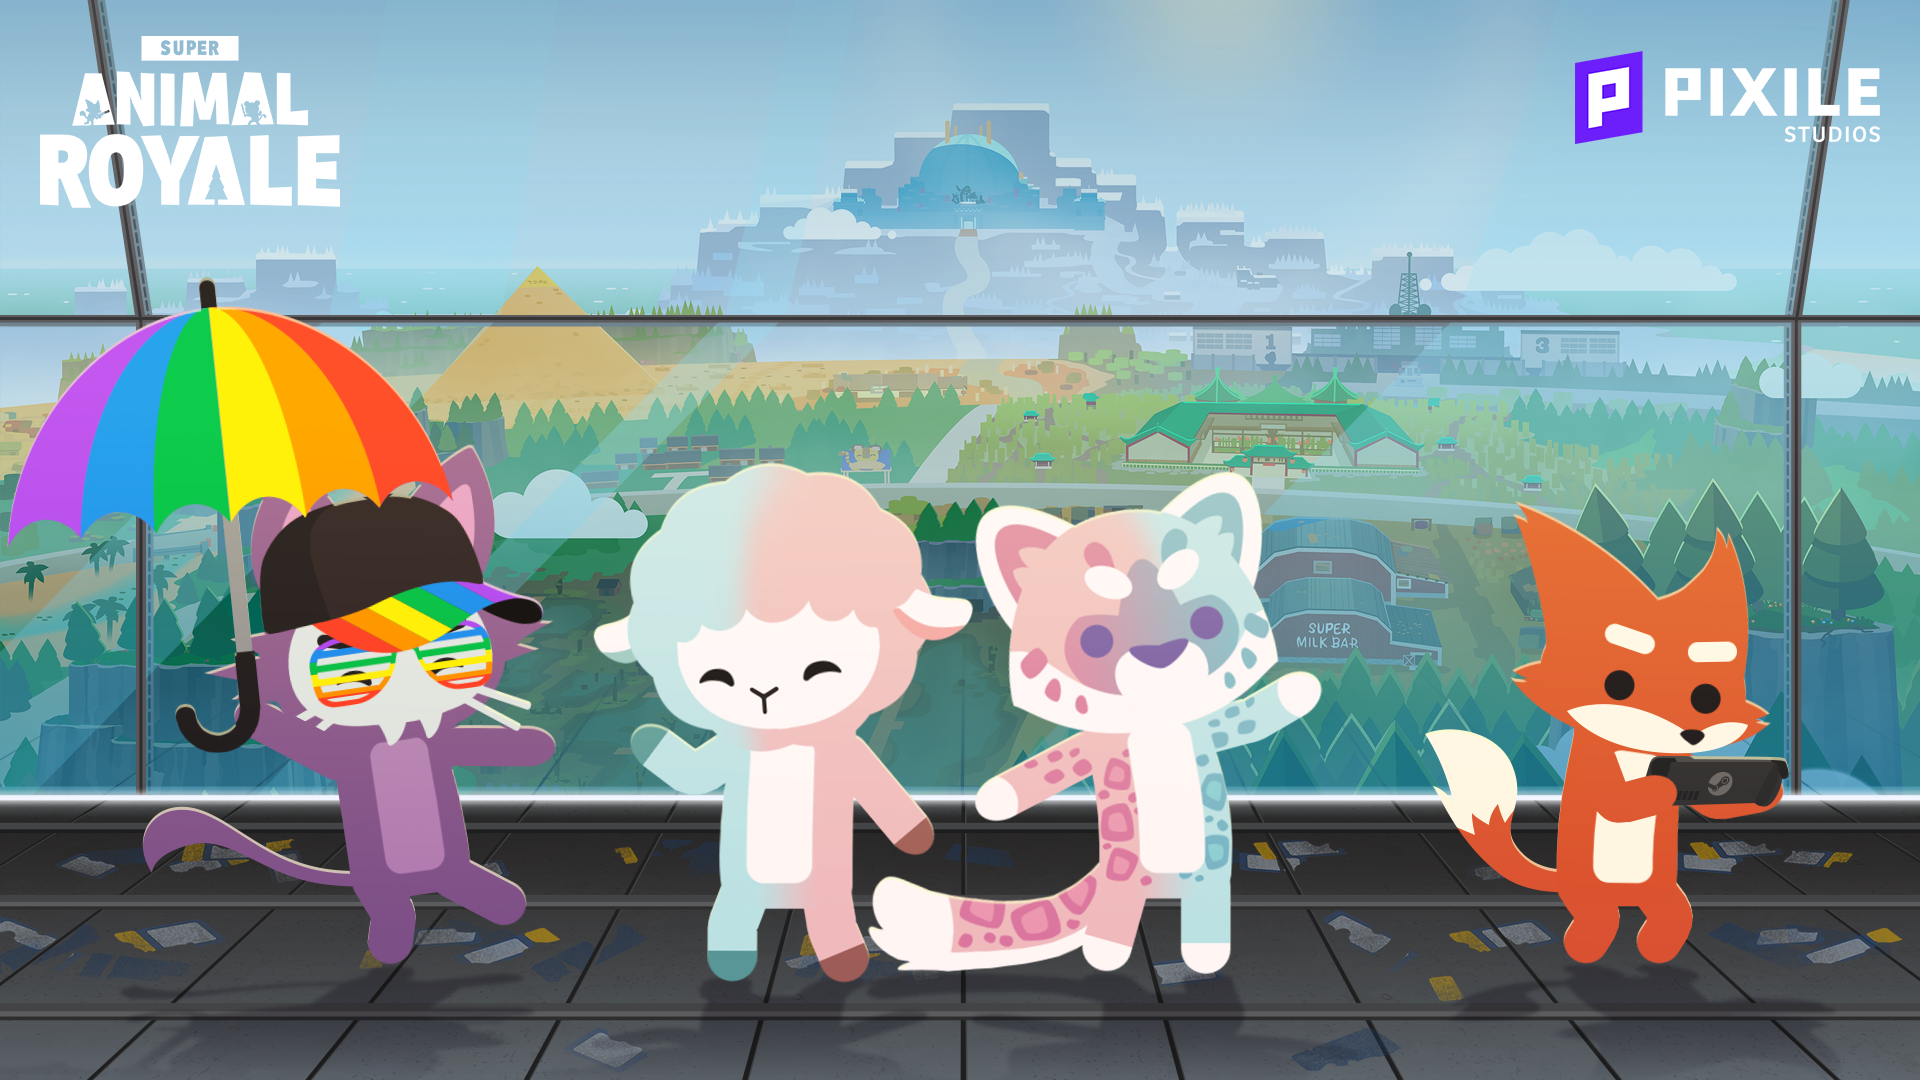 : SvR updates, Super Animal breeds, Steam Deck and more! · Super  Animal Royale update for 24 May 2022 · SteamDB